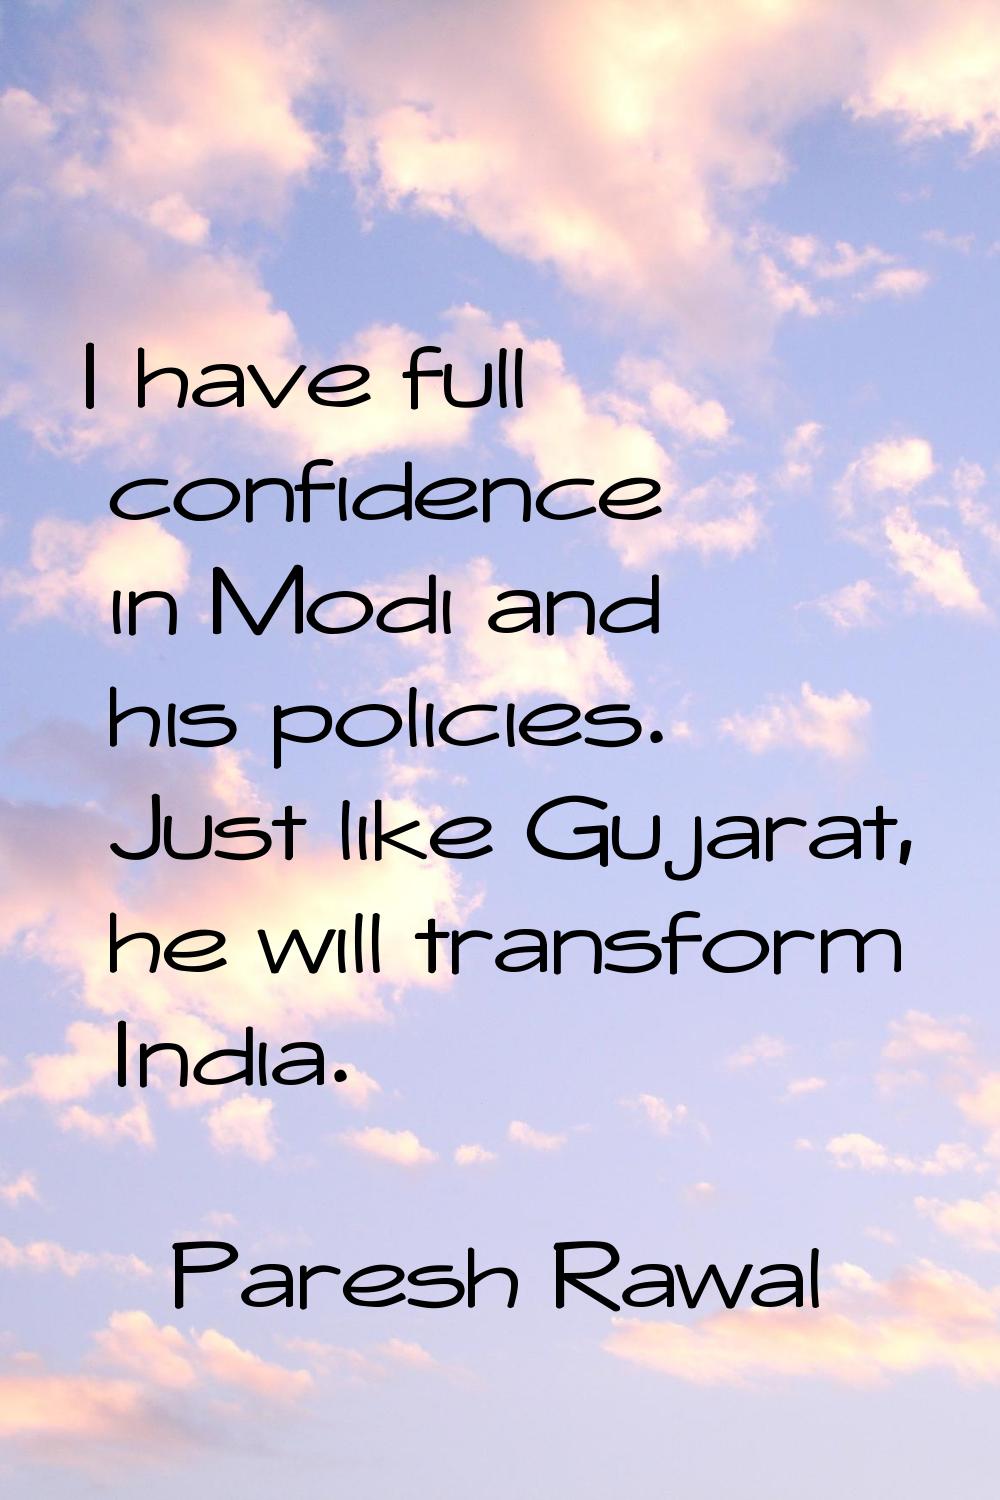 I have full confidence in Modi and his policies. Just like Gujarat, he will transform India.